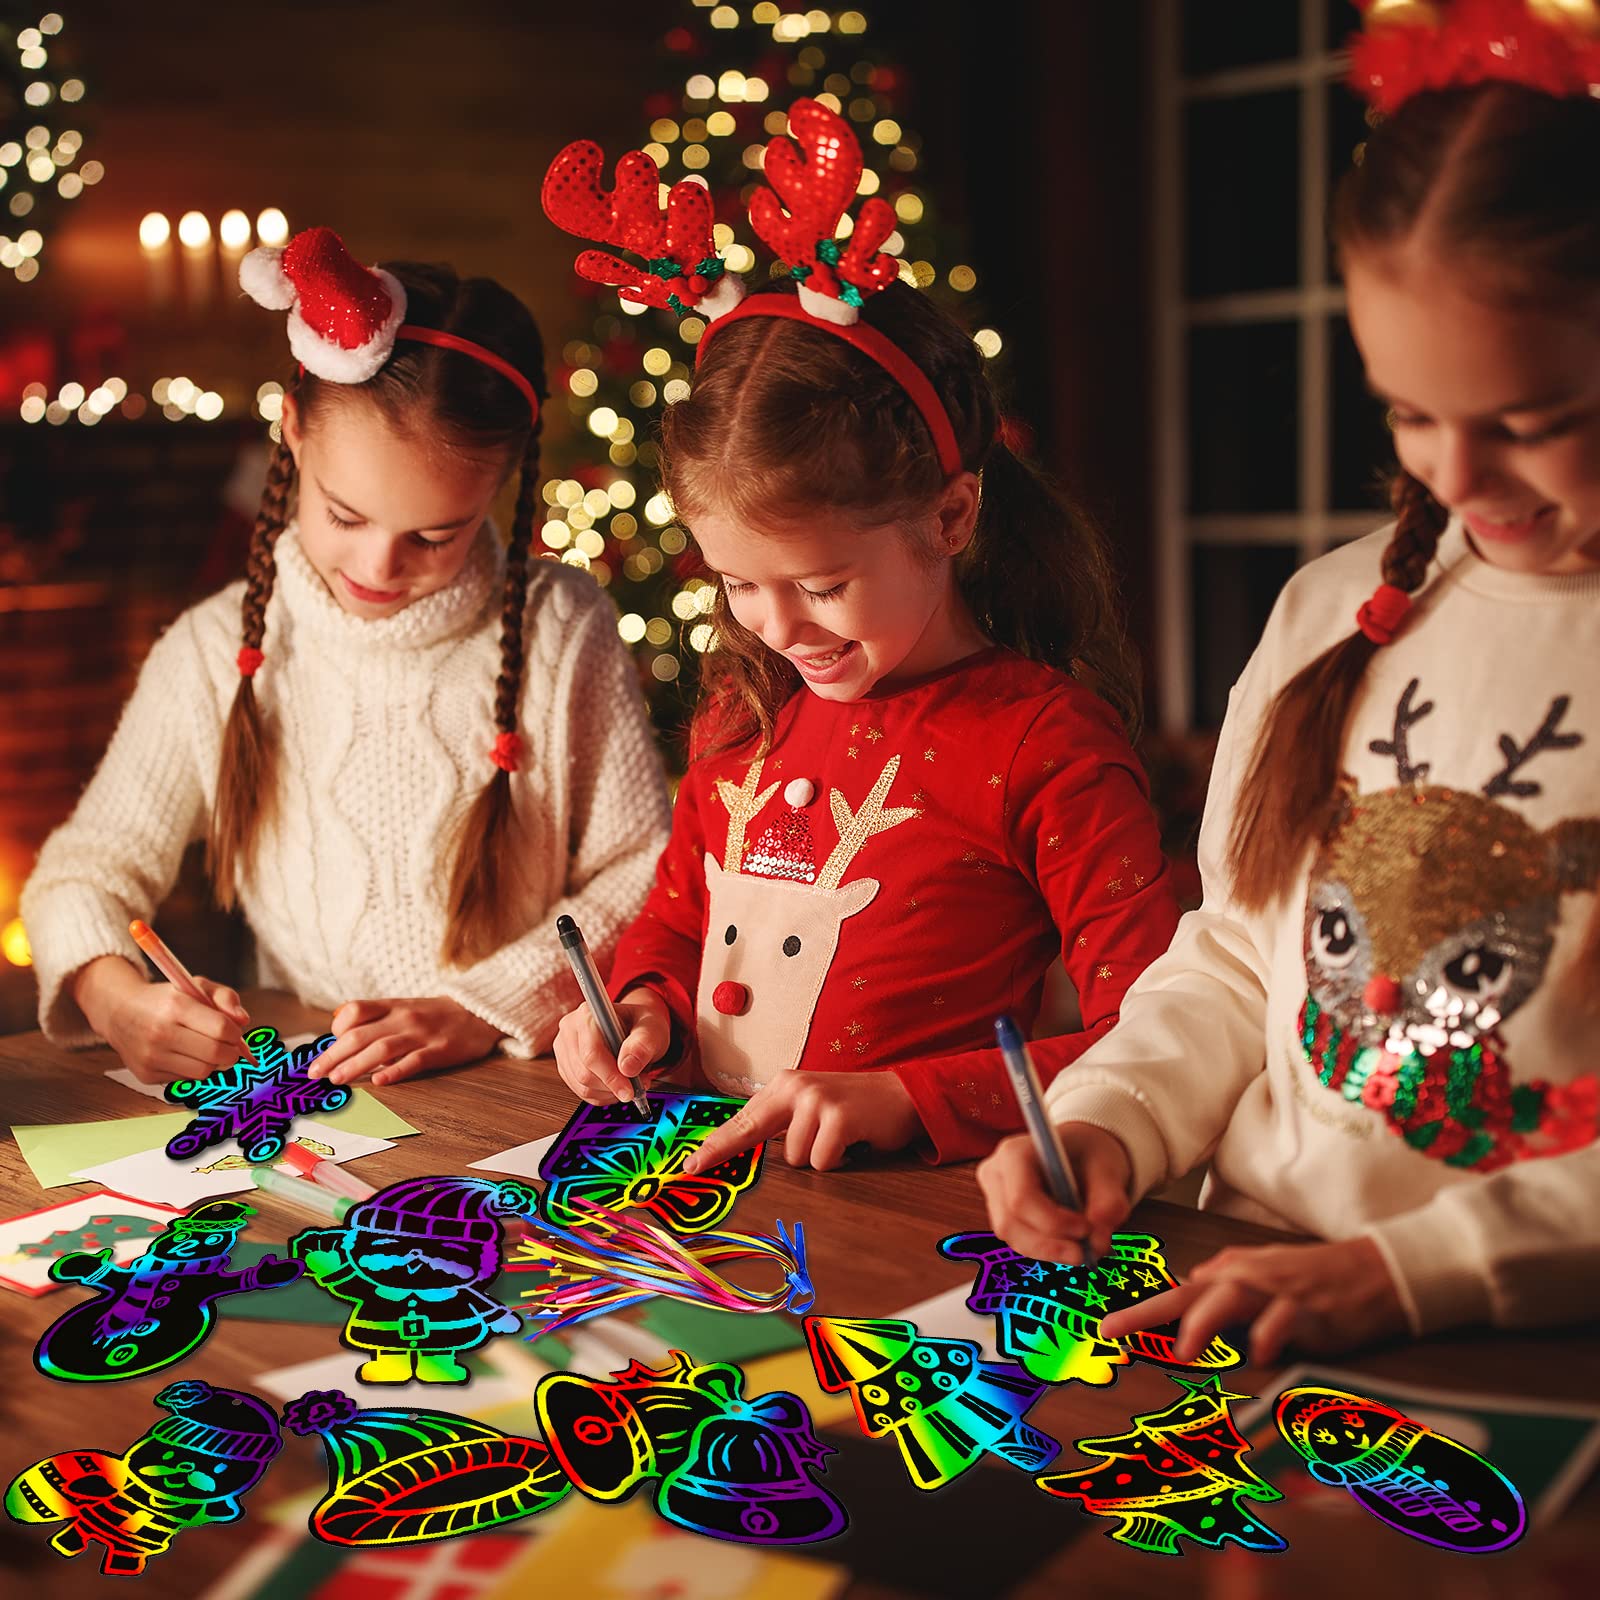 Max Fun Rainbow Color Scratch Christmas Ornaments (48 Counts) - Magic Scratch Off Cards Paper Hanging Art Craft Supplies Educational Toys Kit with 48 PCS Drawing Sticks & Cords for Kids Party Favors